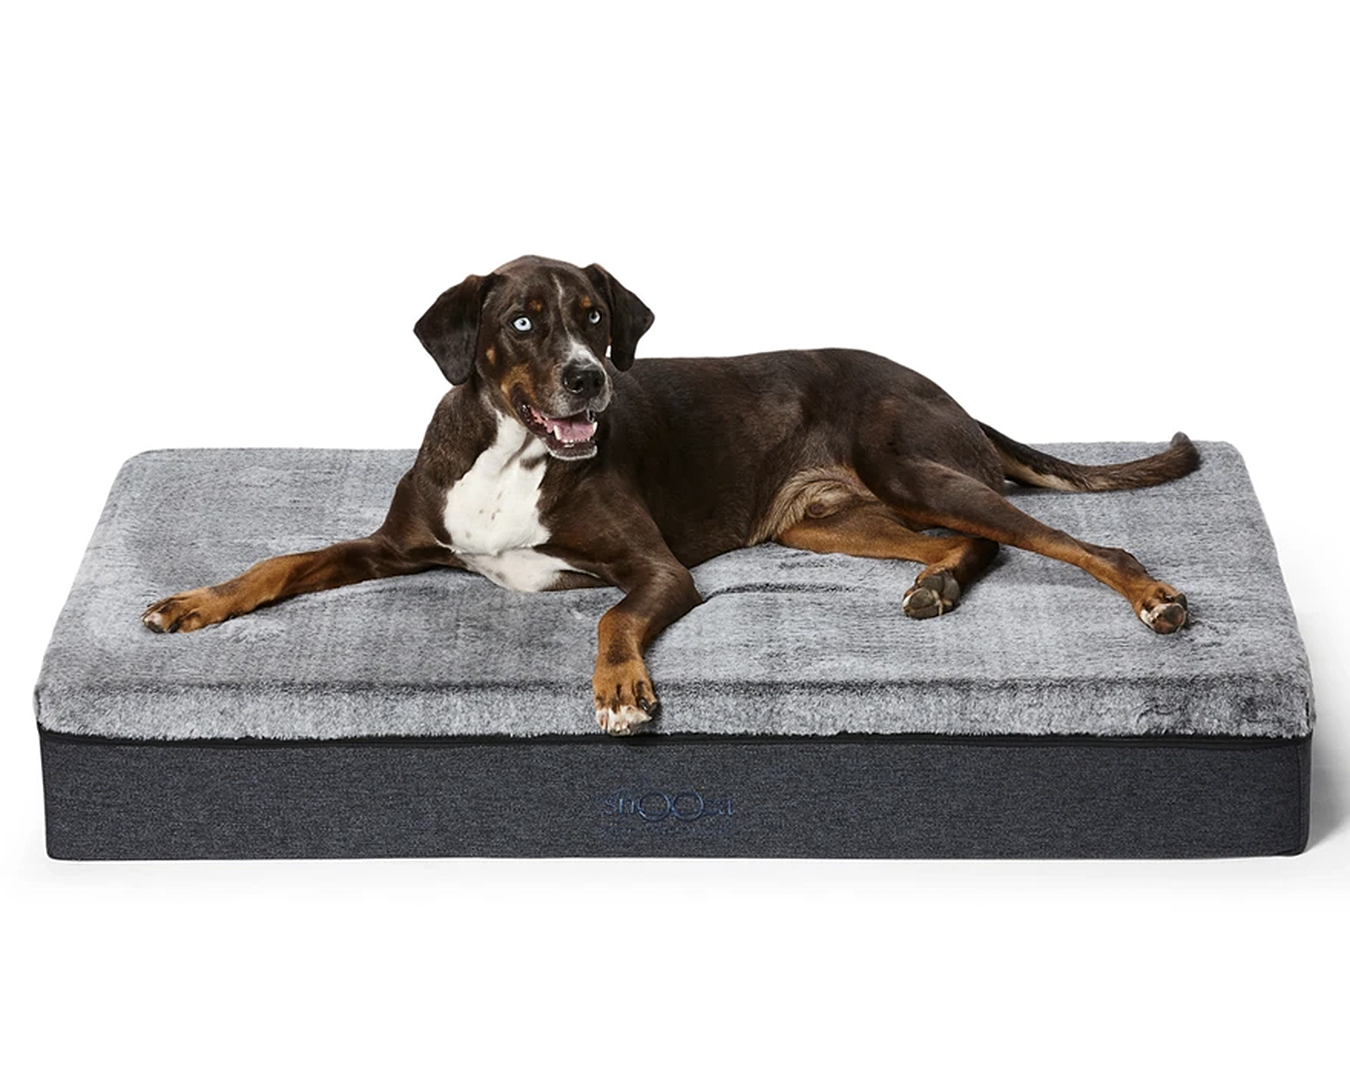 The best firm big dog bed is this one from Snooza, this big dog looks very comfy.